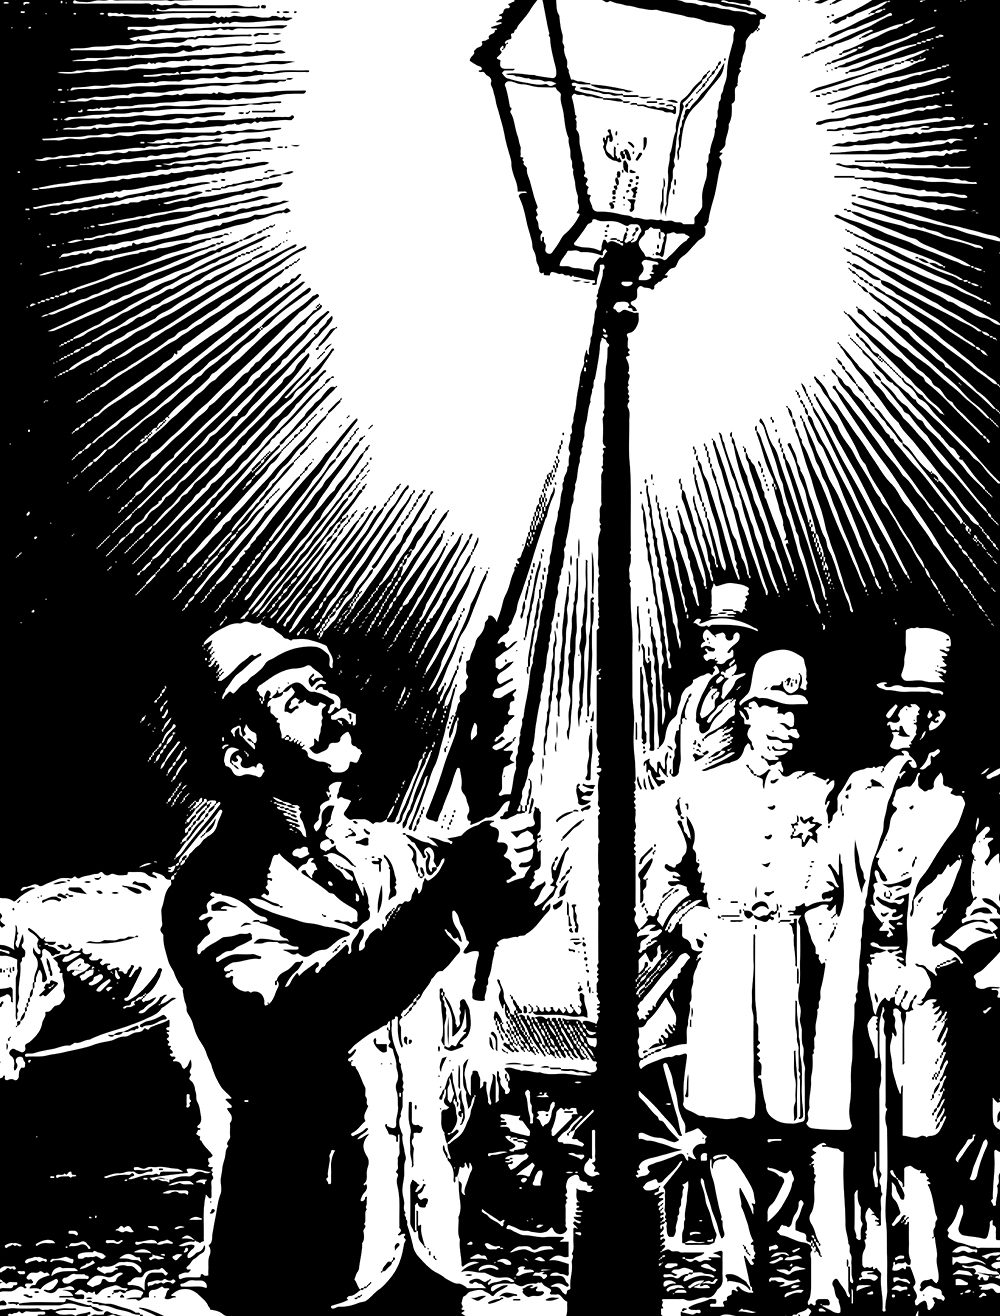 A historical illustration of a lamplighter lighting a gas lamp while three other people observe